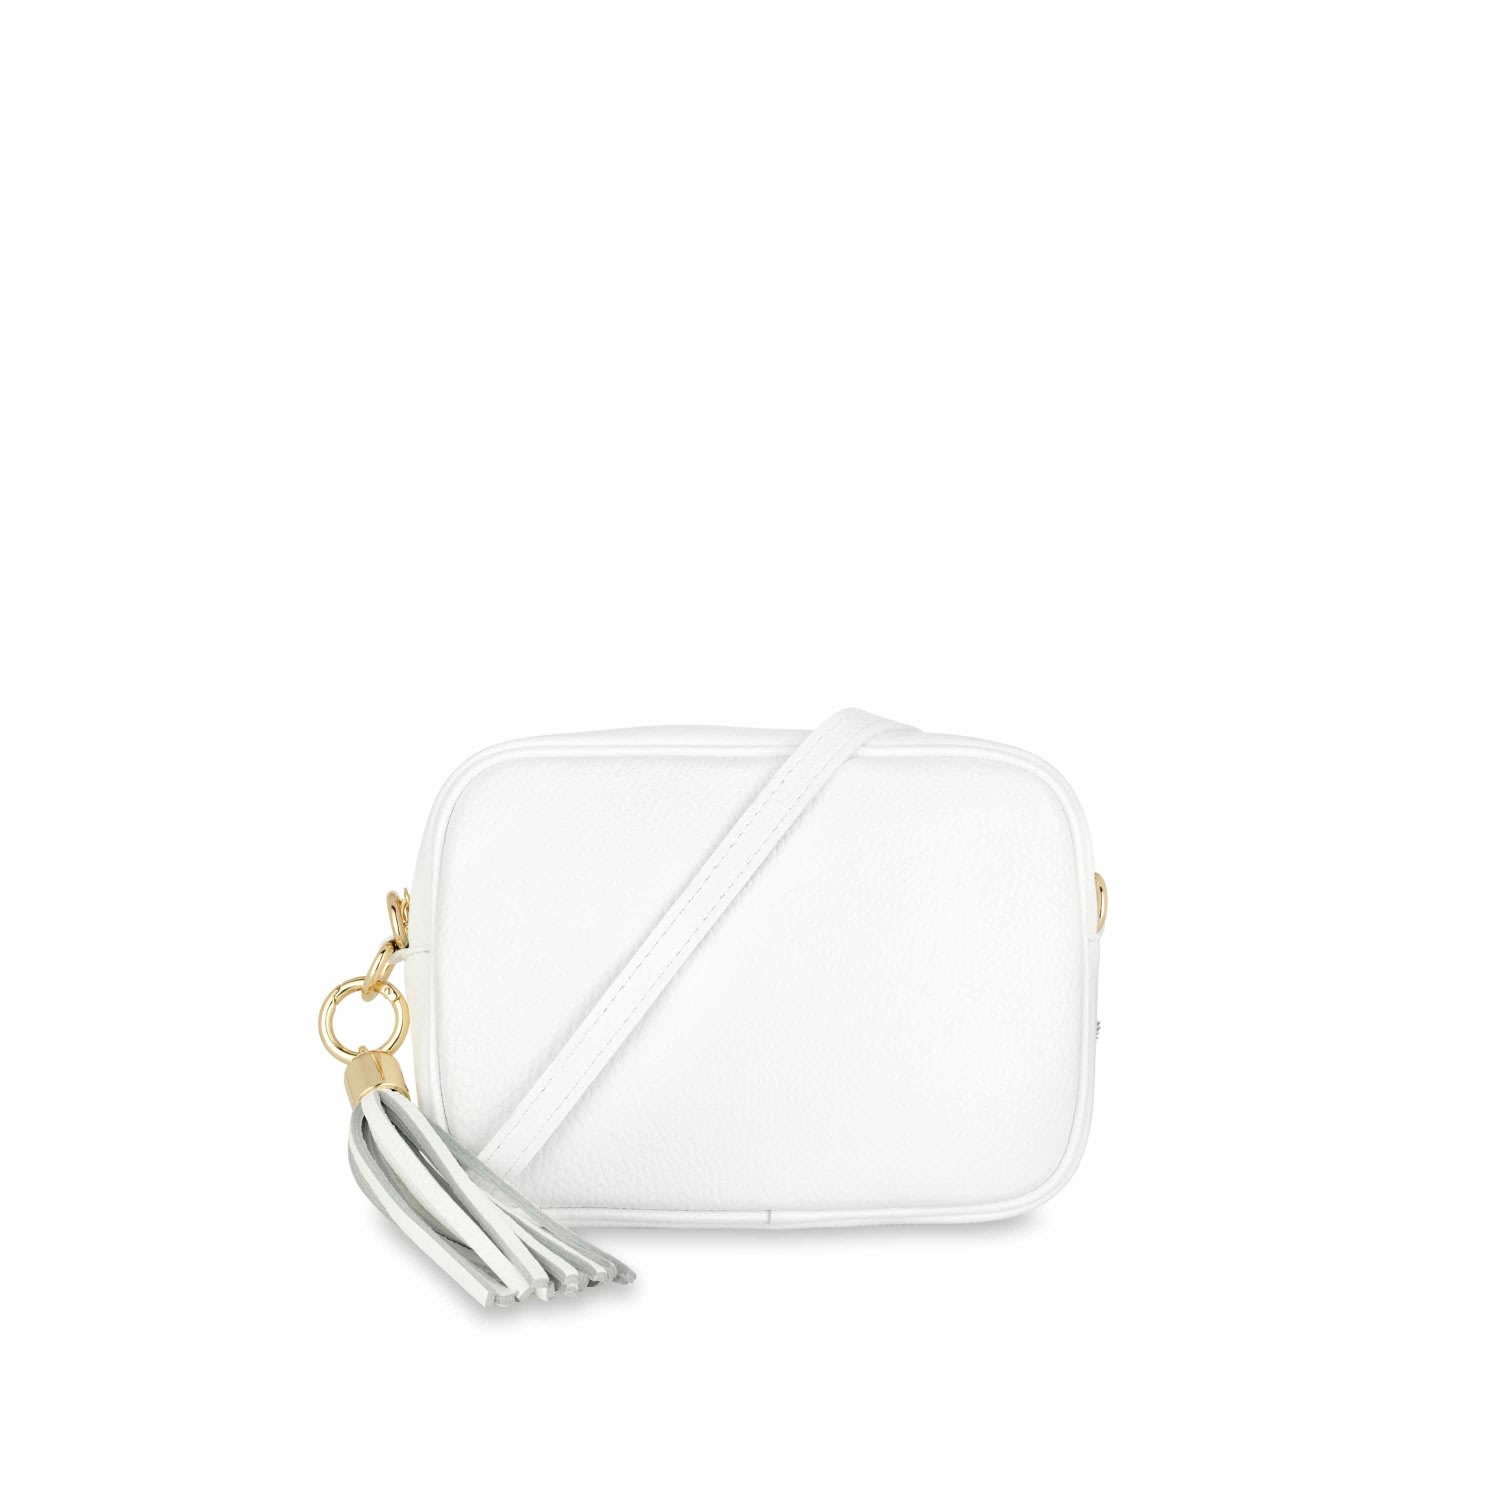 Apatchy London Women's The Tassel White Leather Crossbody Bag